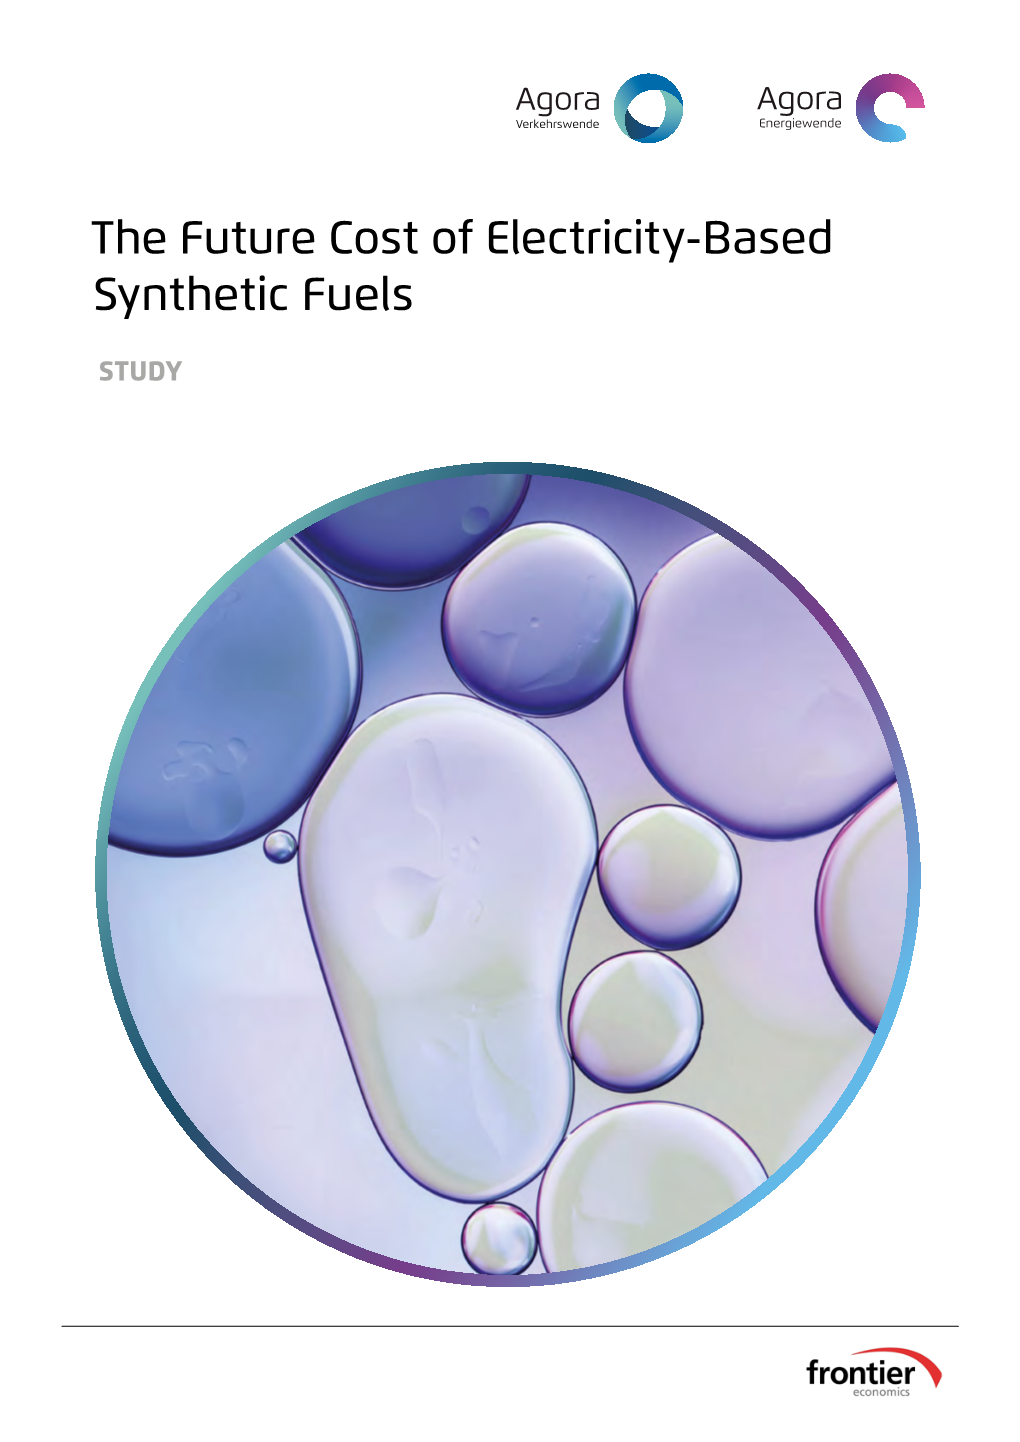 STUDY | the Future Cost of Electricity-Based Synthetic Fuels